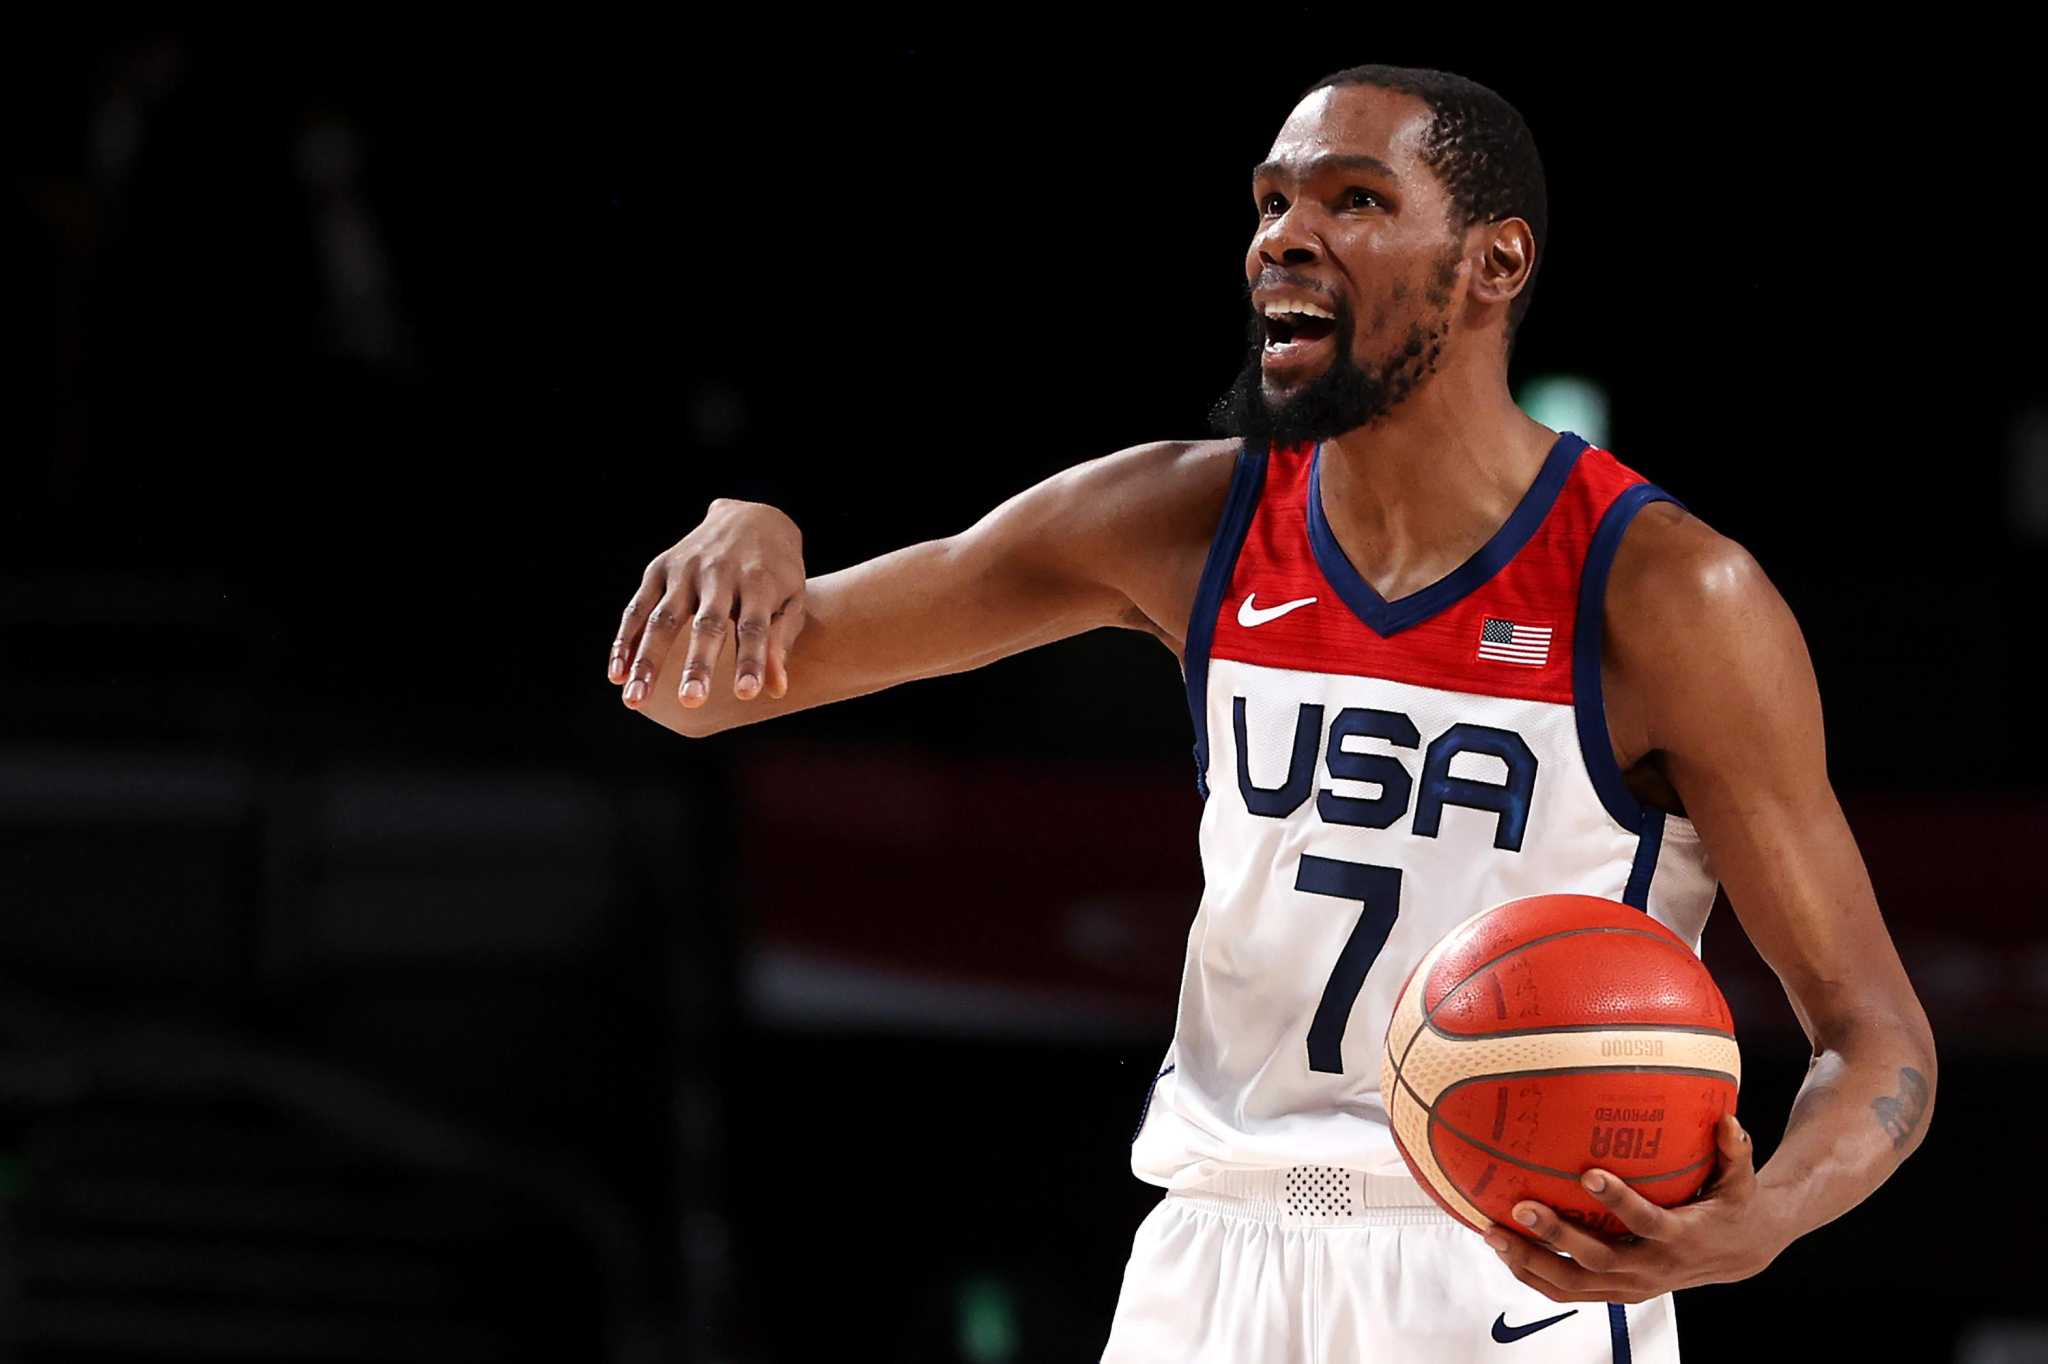 Kevin Durant leads Team USA to Olympic final, won’t settle for less